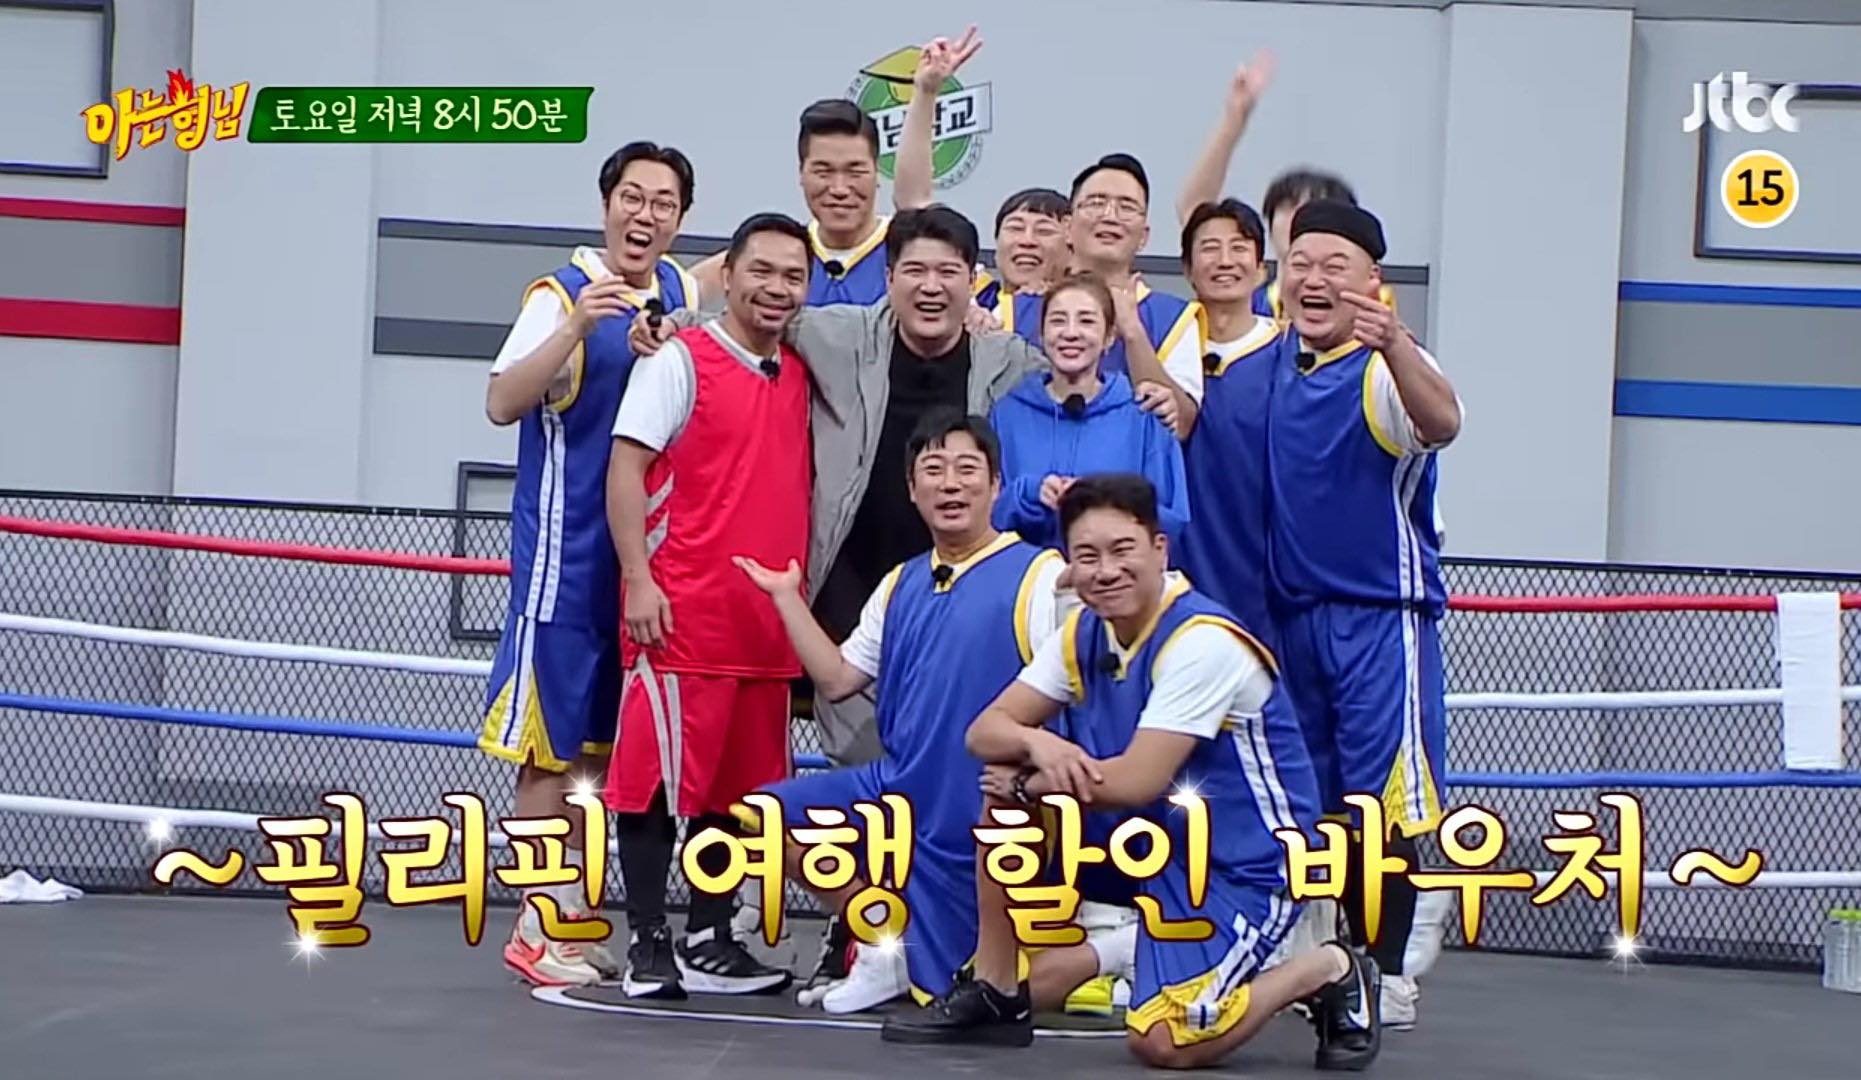 WATCH: Korean variety show ‘Knowing Bros’ releases teaser for Pacquiao, Sandara guesting